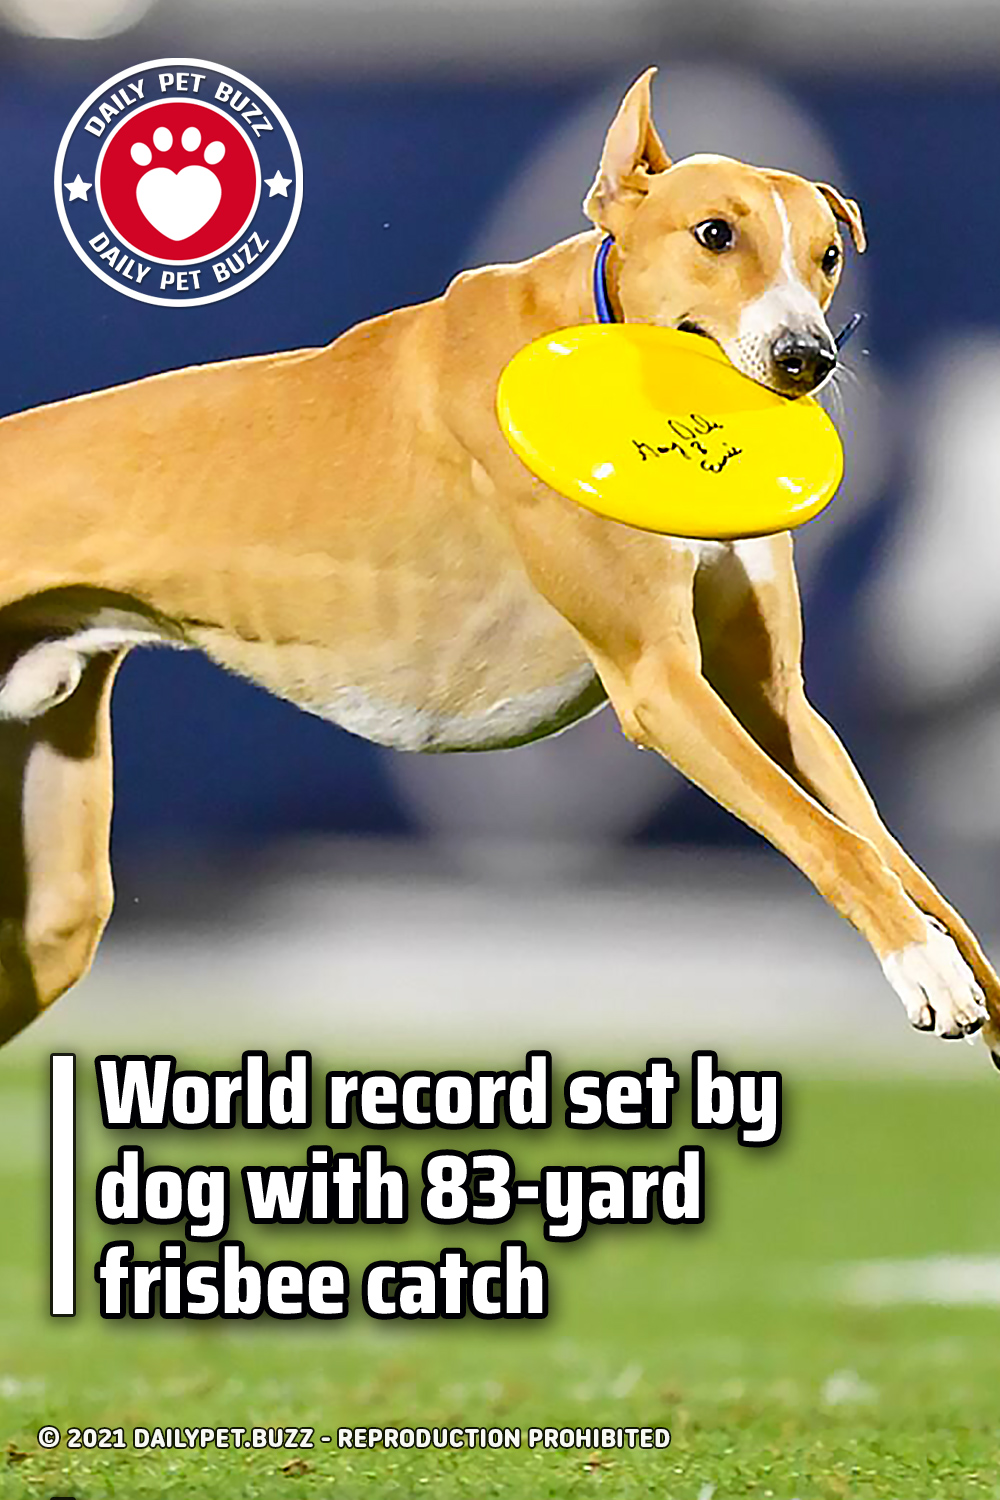 World record set by dog with 83-yard frisbee catch